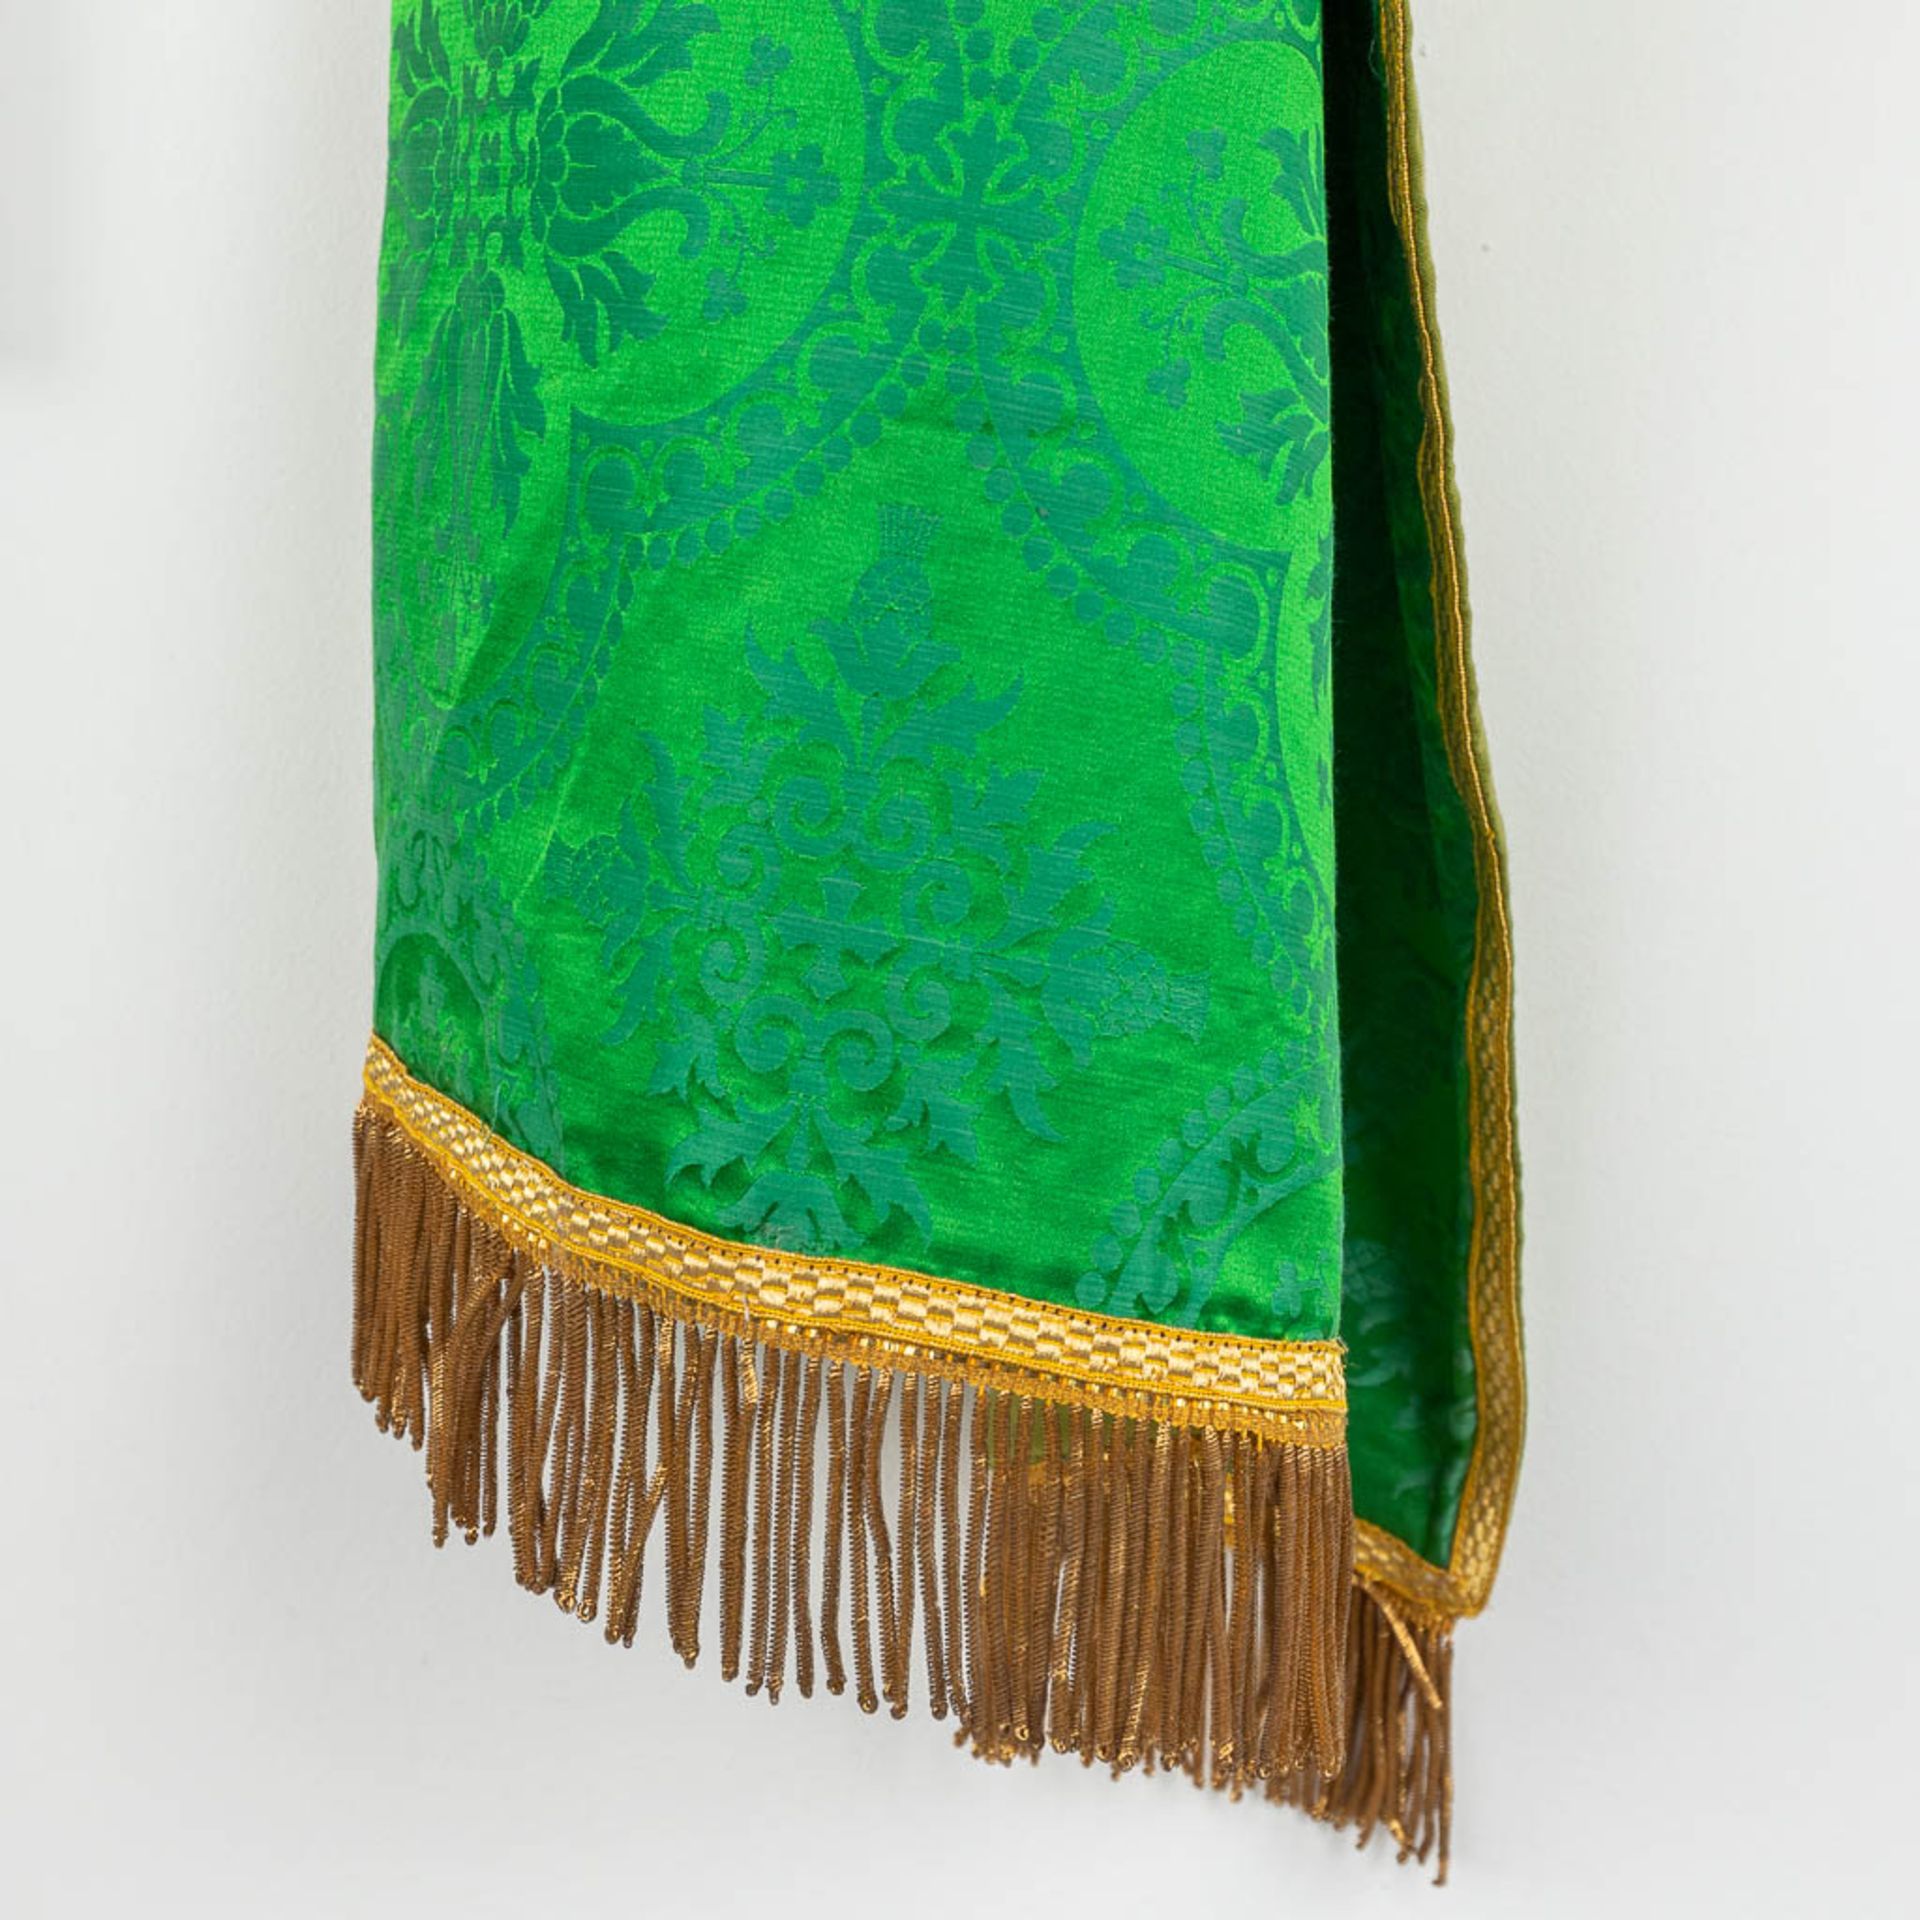 A Cope and Humeral Veil, finished with thick gold thread and green fabric and the IHS logo. - Image 14 of 14